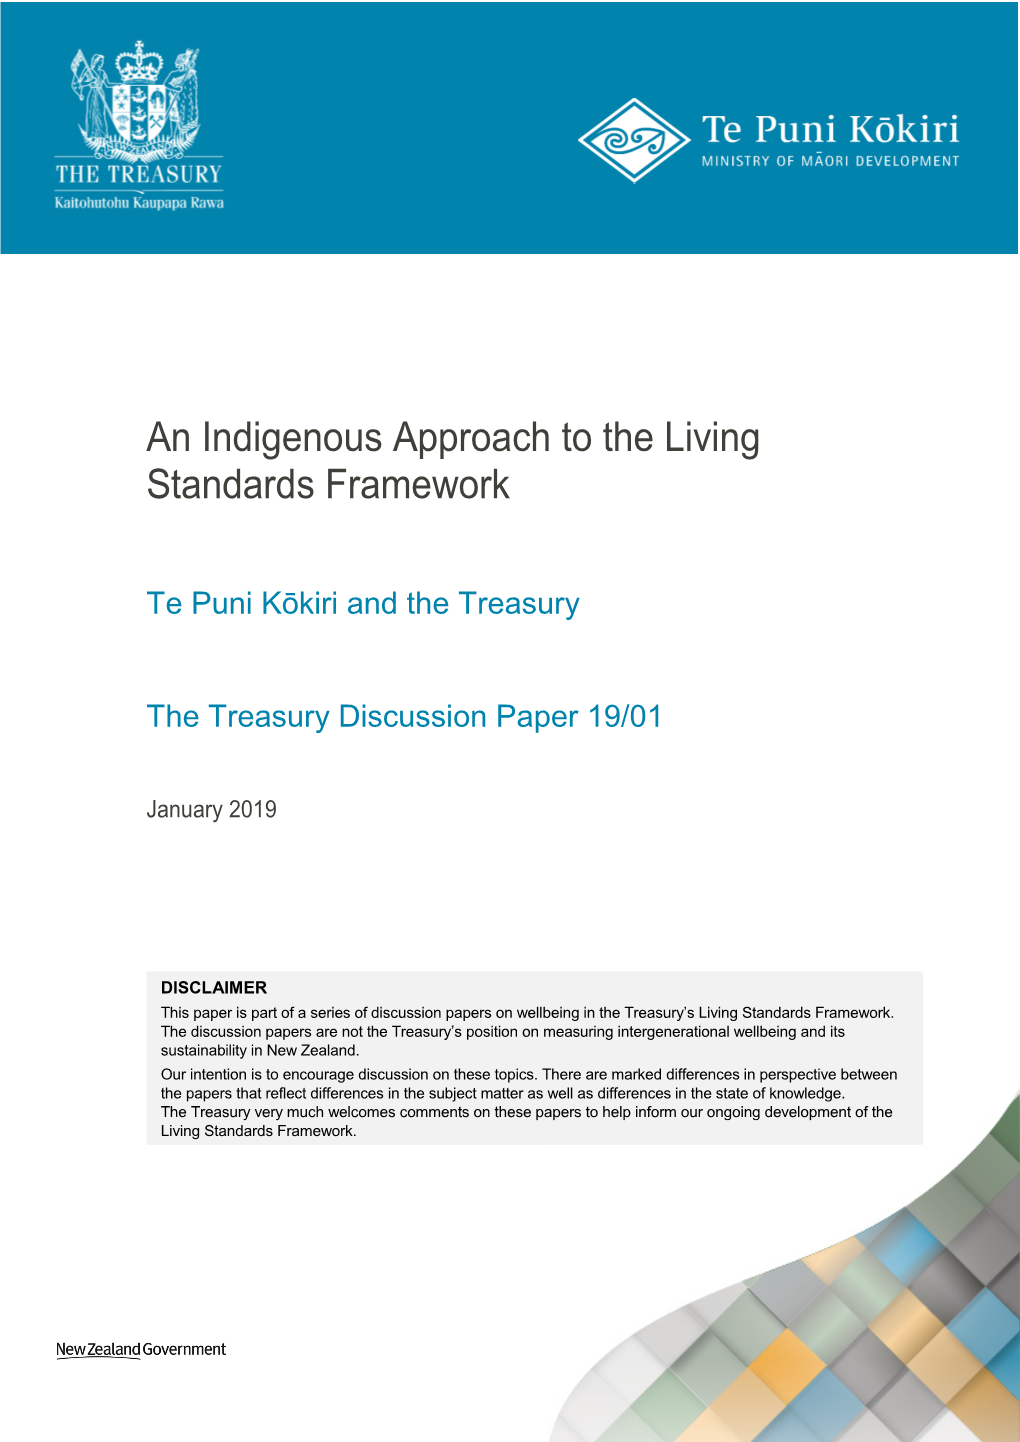 An Indigenous Approach to the Living Standards Framework